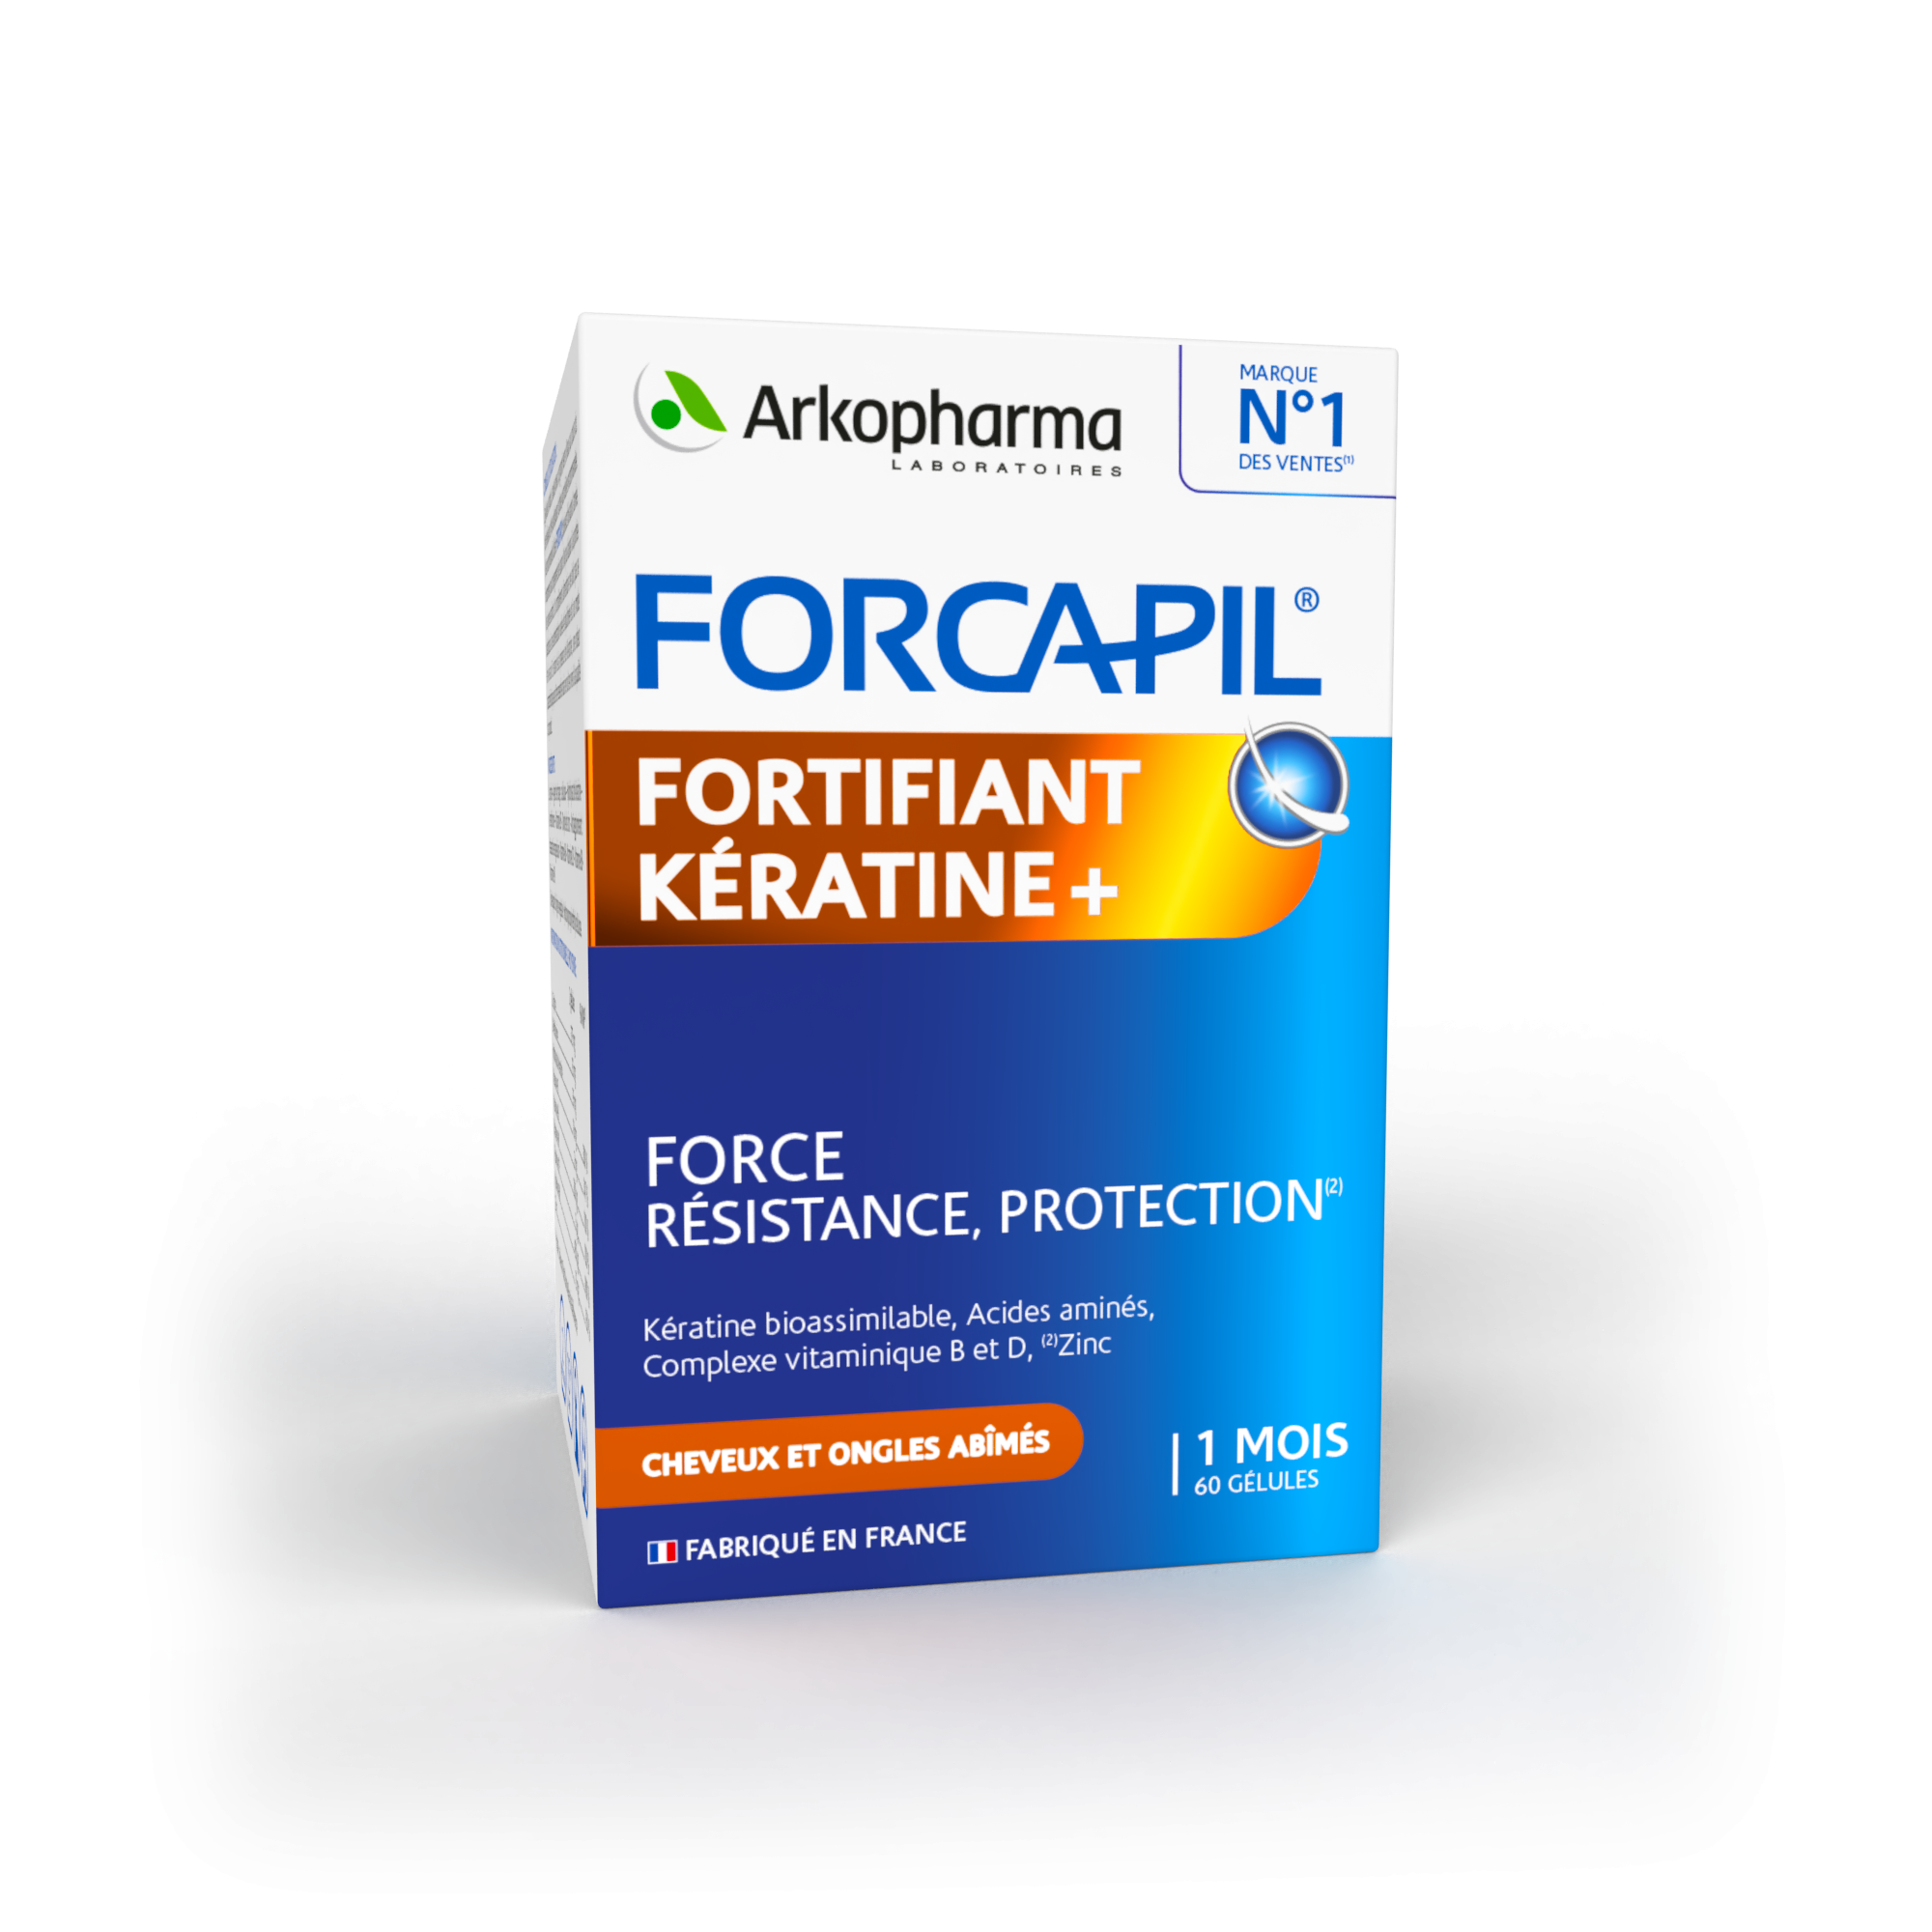 Forcapil Fortifiant Keratine+